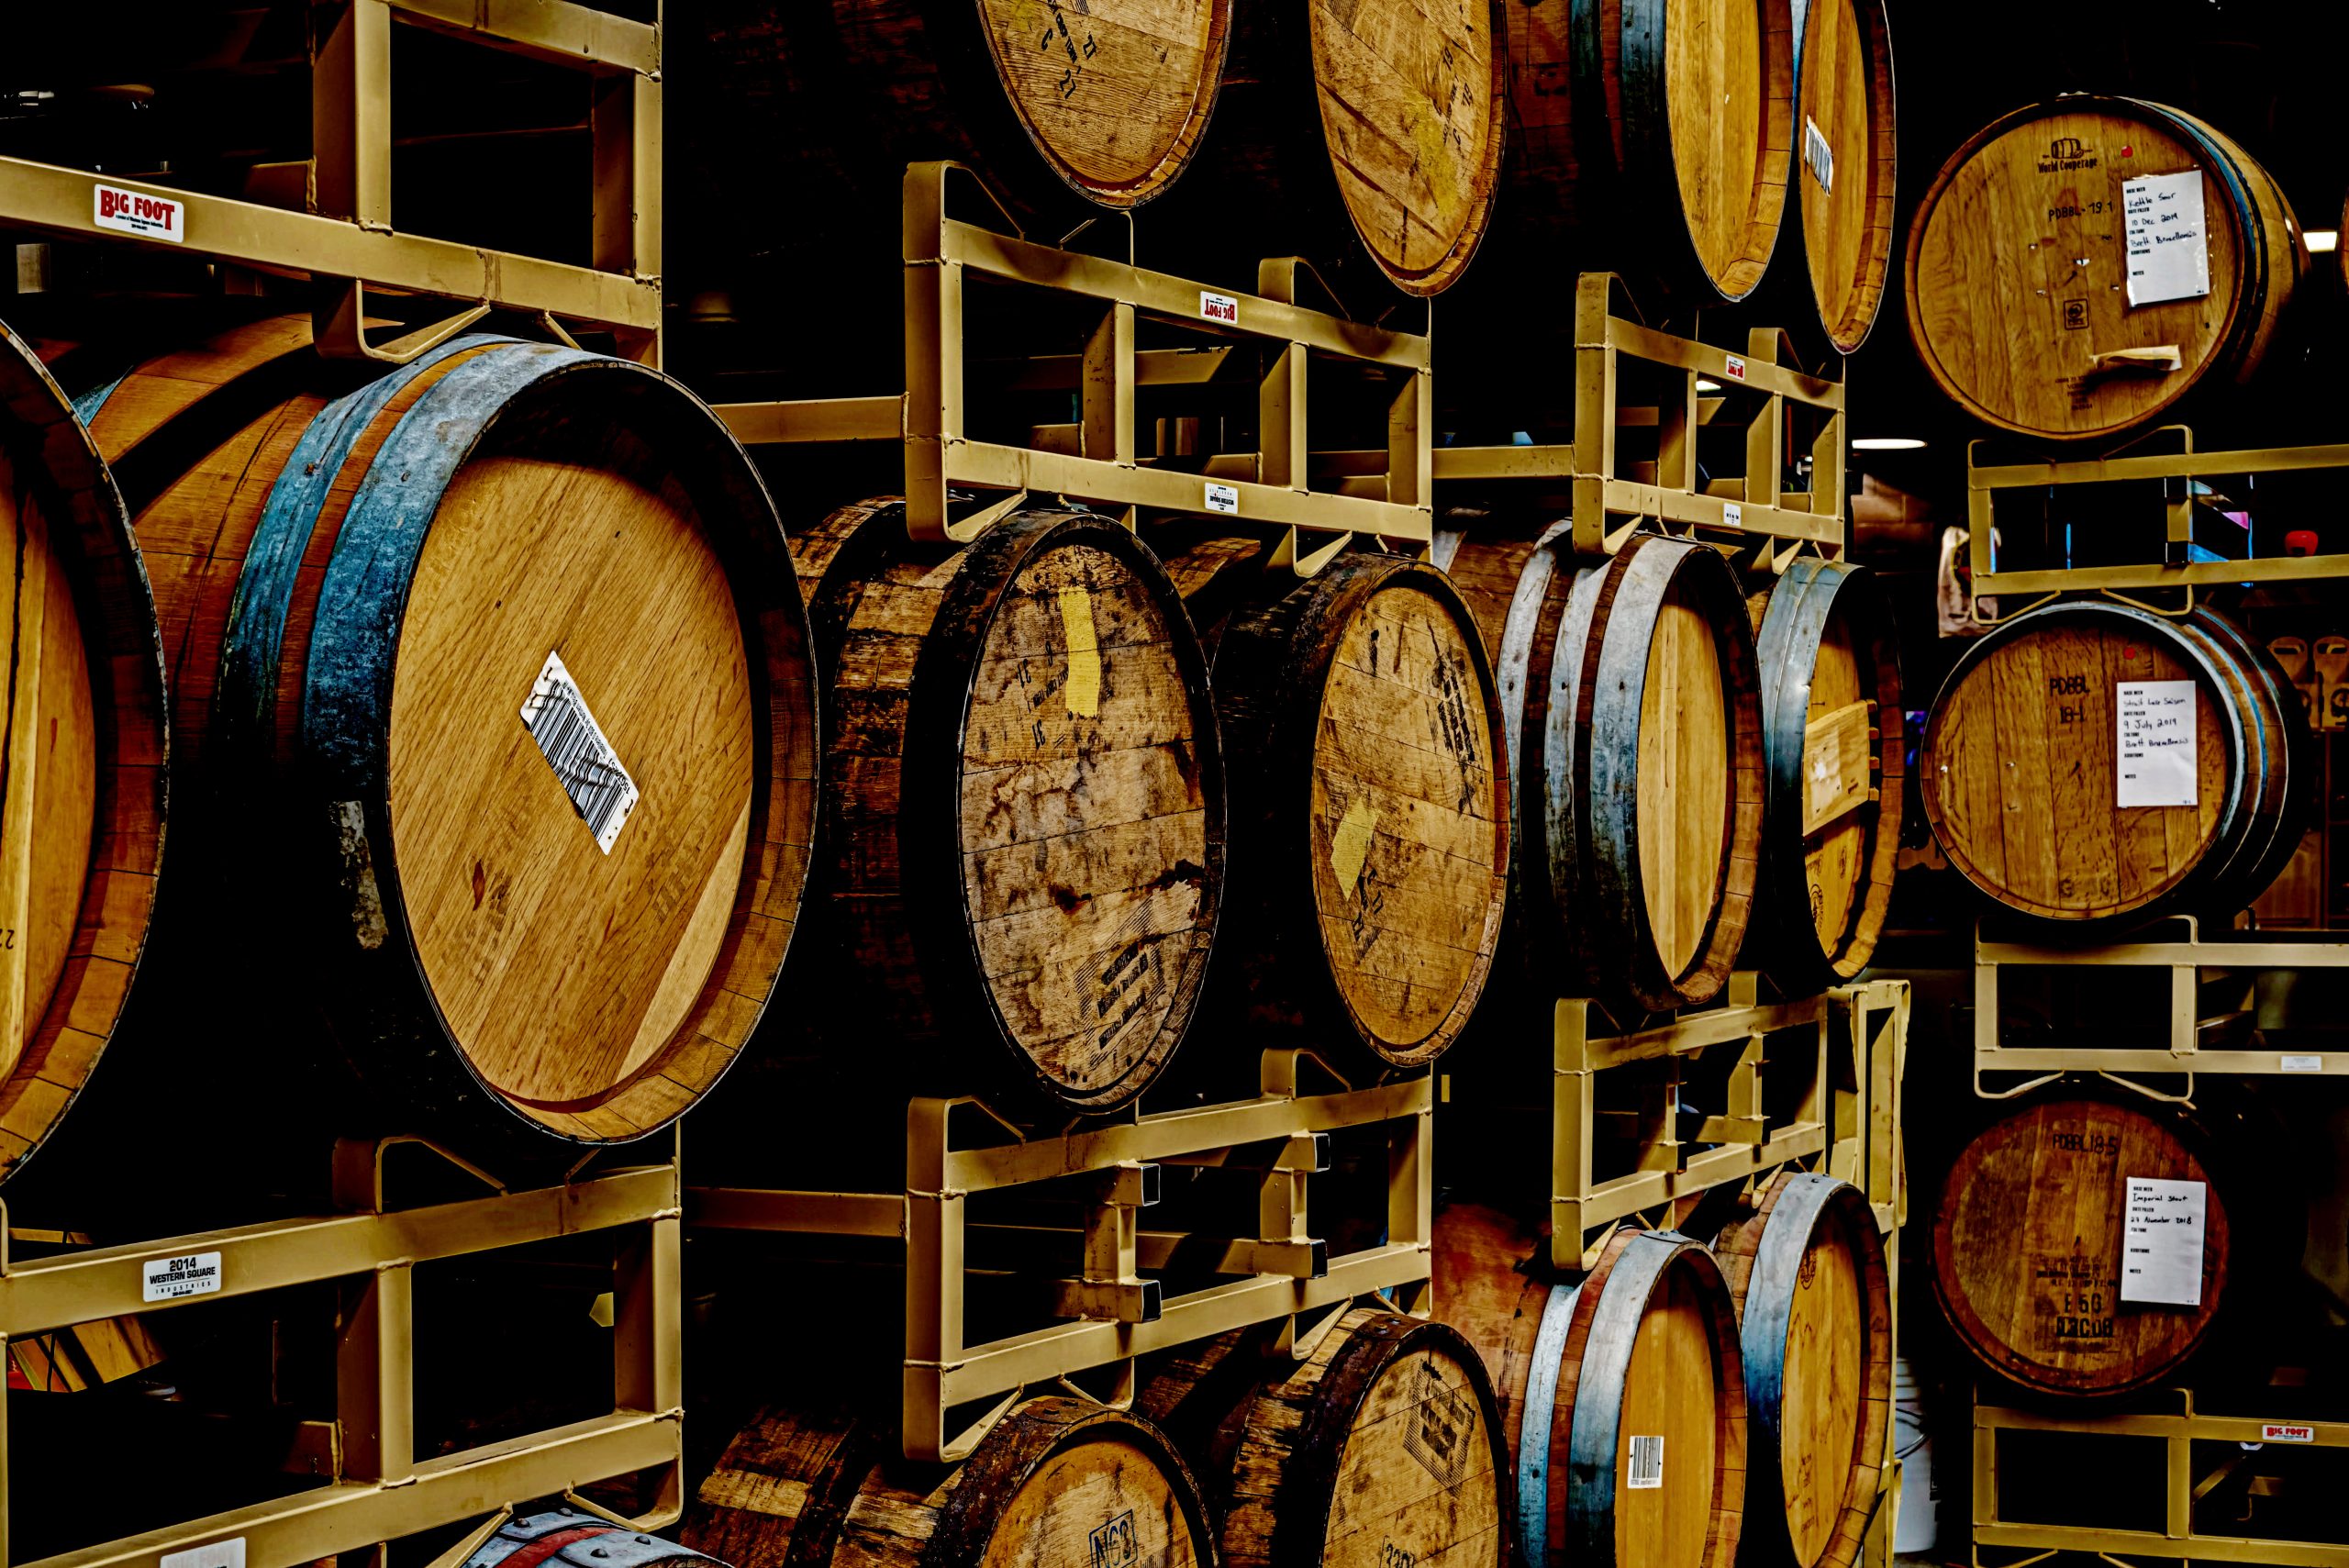 A dark, high-contrast image of oak whiskey and wine barrels stacked 3-high on racks at Prairie Dog Brewing.